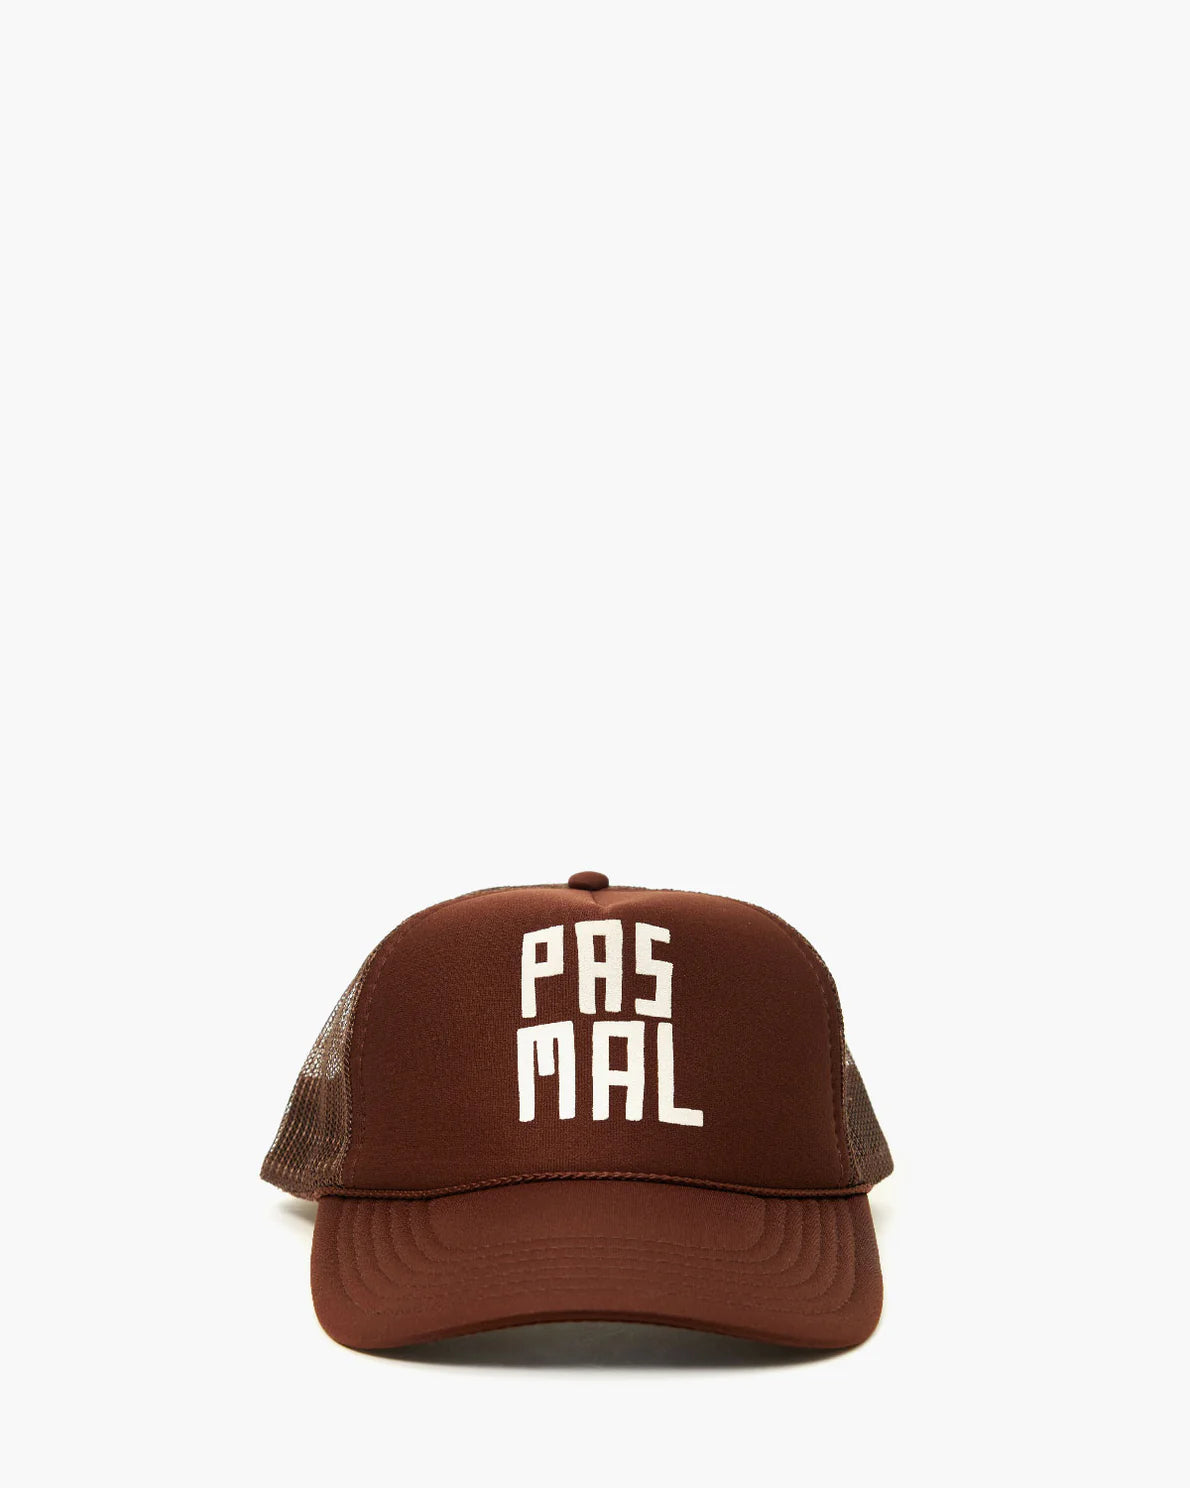 Clare V. Oui Trucker Hat - Chocolate Pas Mal